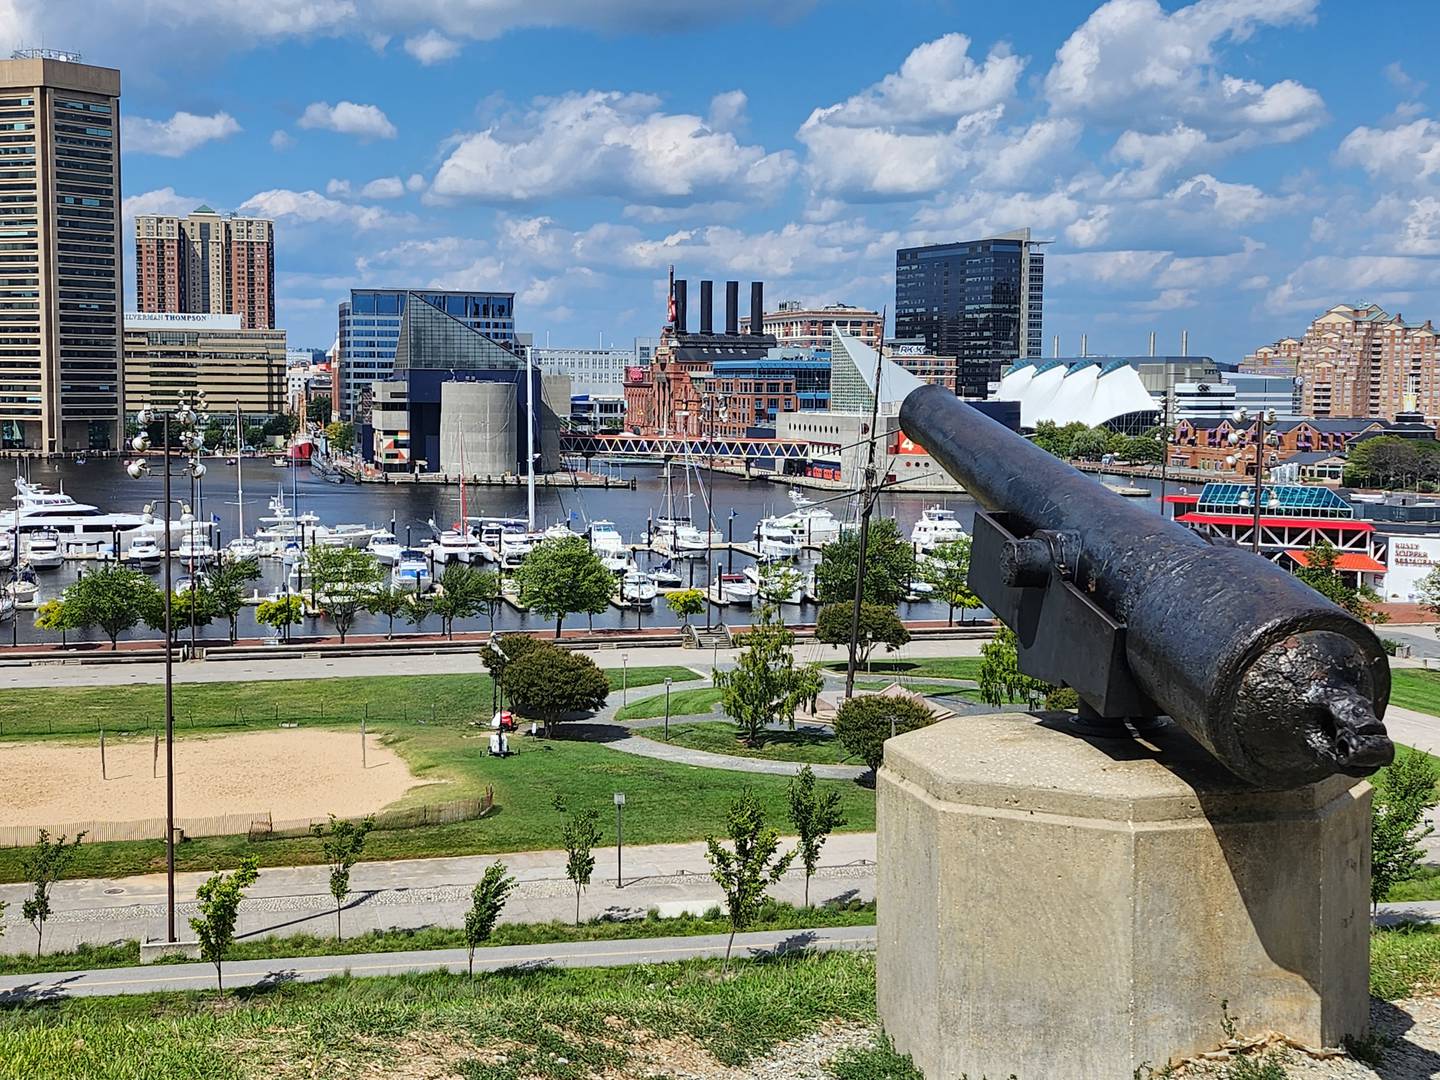 Walking around Federal Hill Park with someone allows for a great view of Baltimore and discussion of its history.